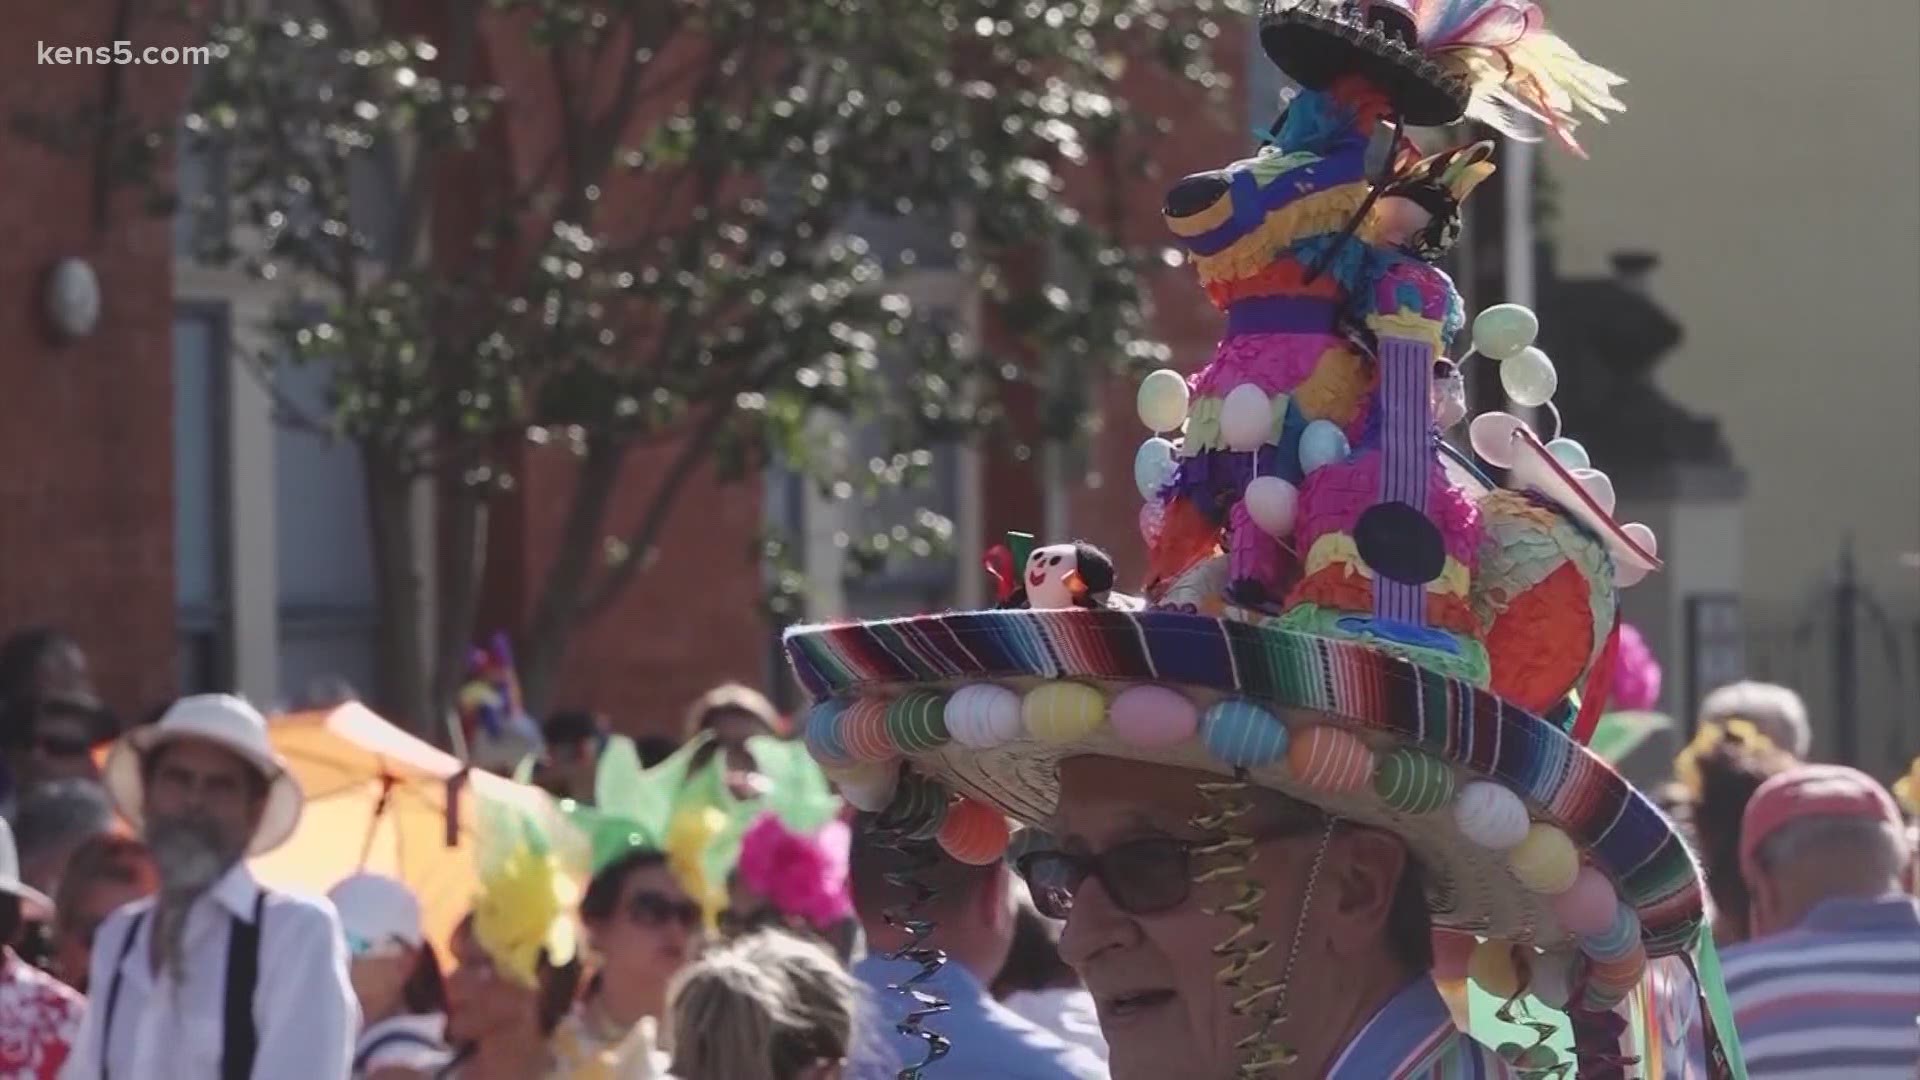 As San Antonio deals with coronavirus surges, the future of Fiesta is in question.